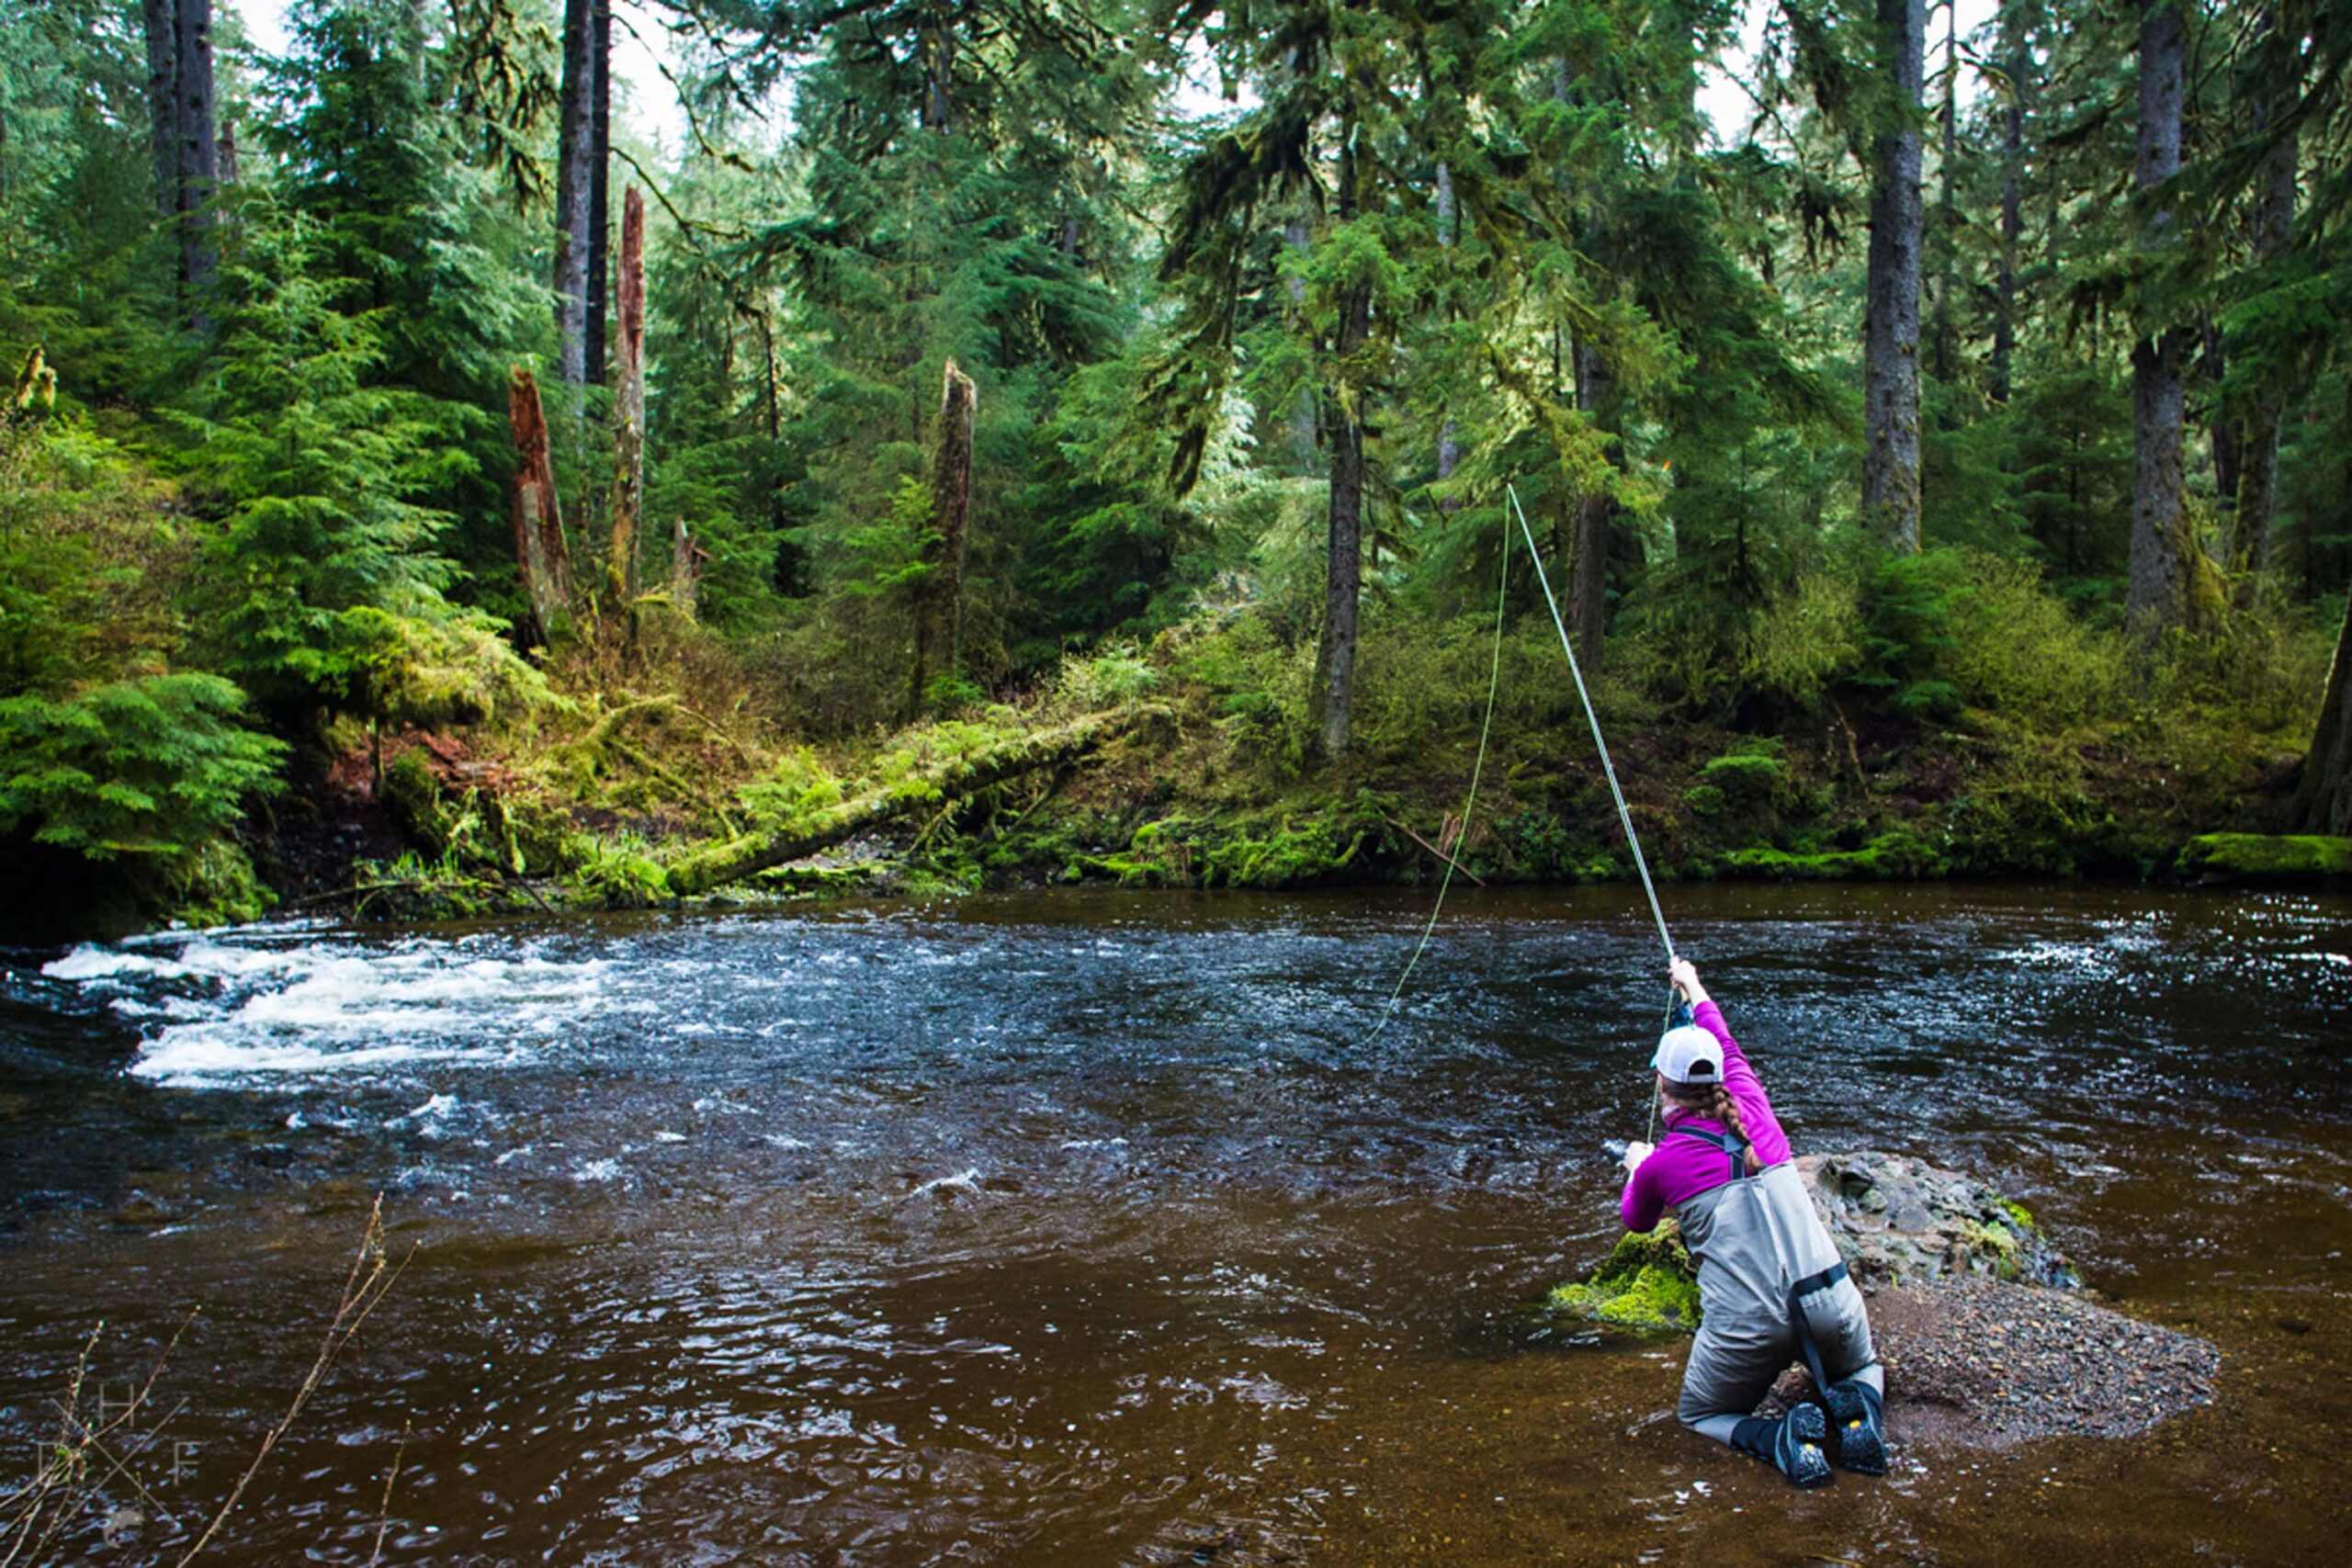 An angler fishes the waters of the Tongass National Forest. (Lee Kuepper)